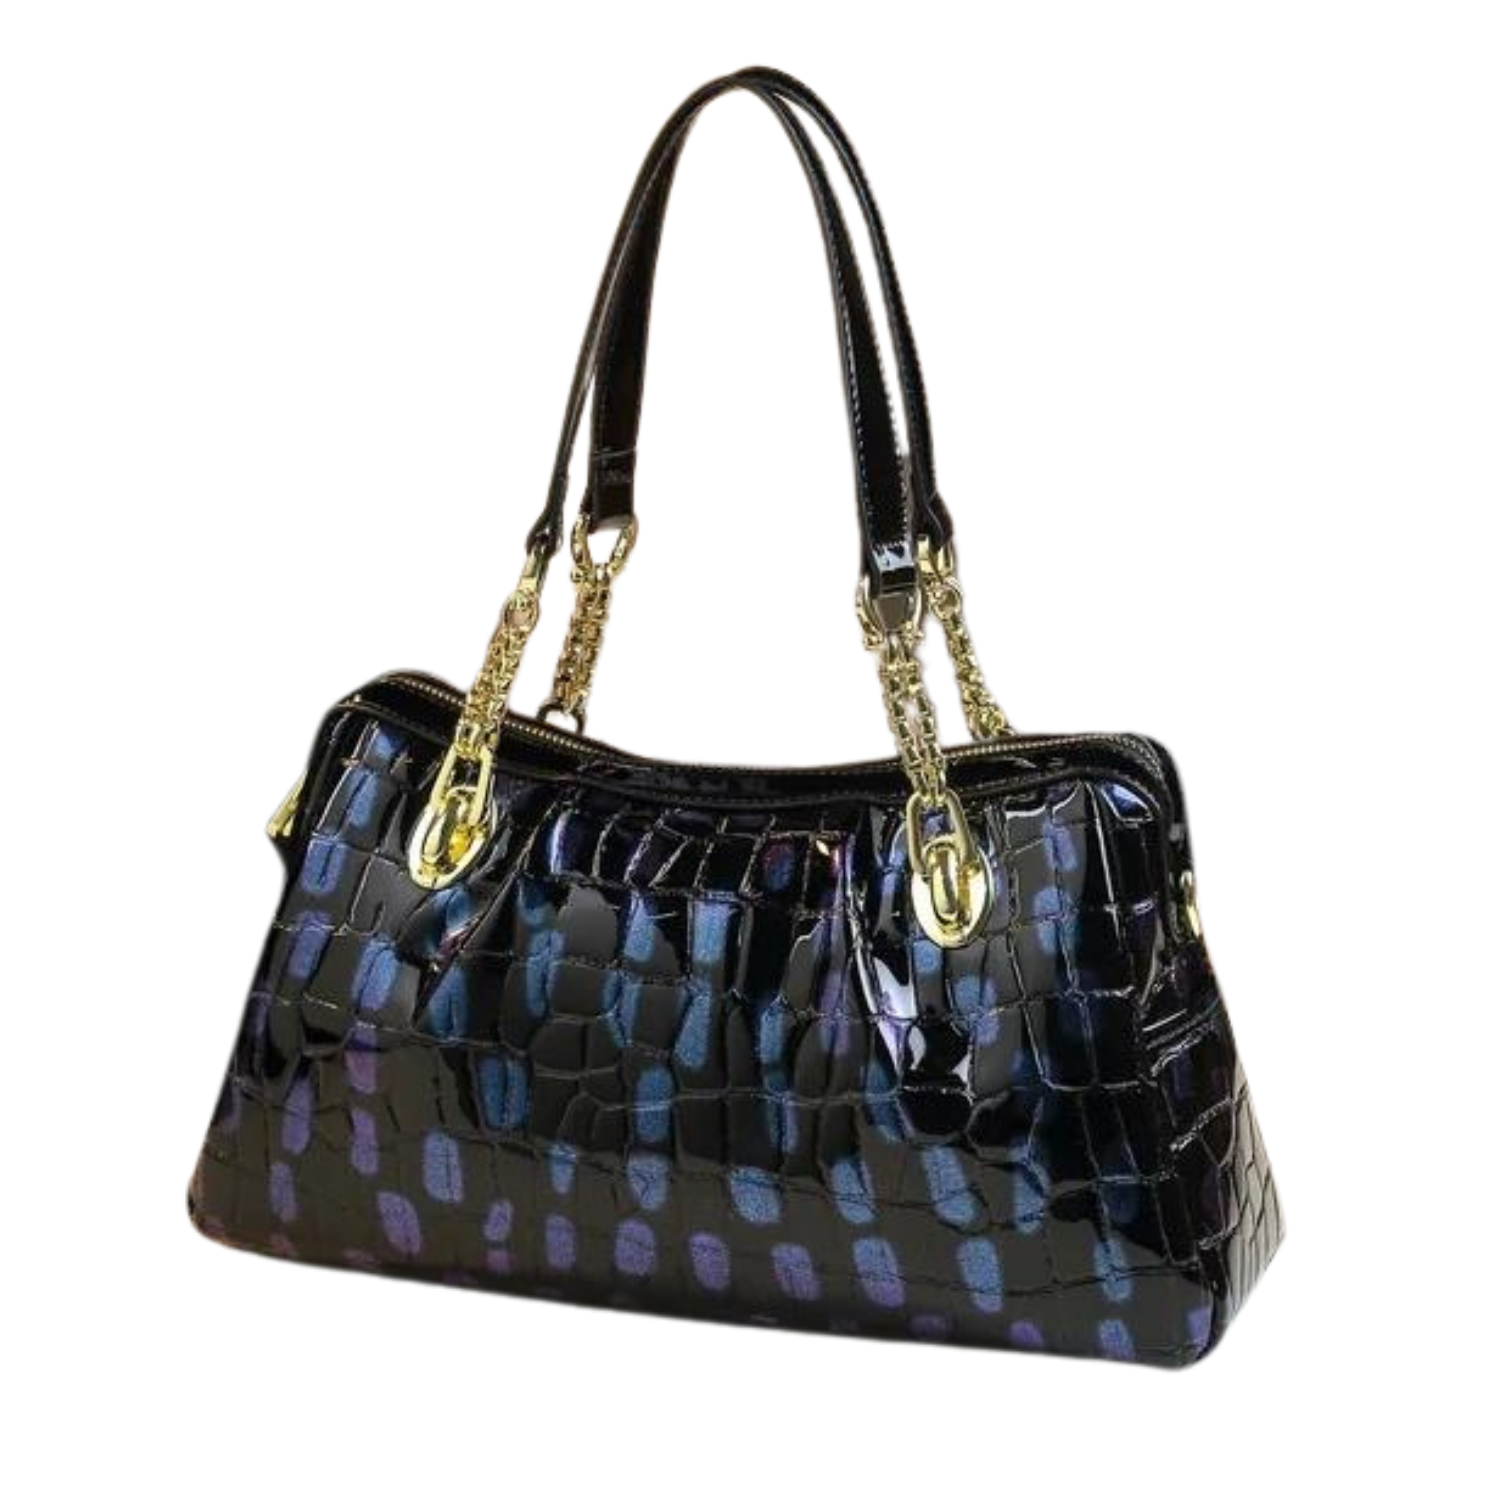 Chic Croc-Effect Leather Tote in Style Blue